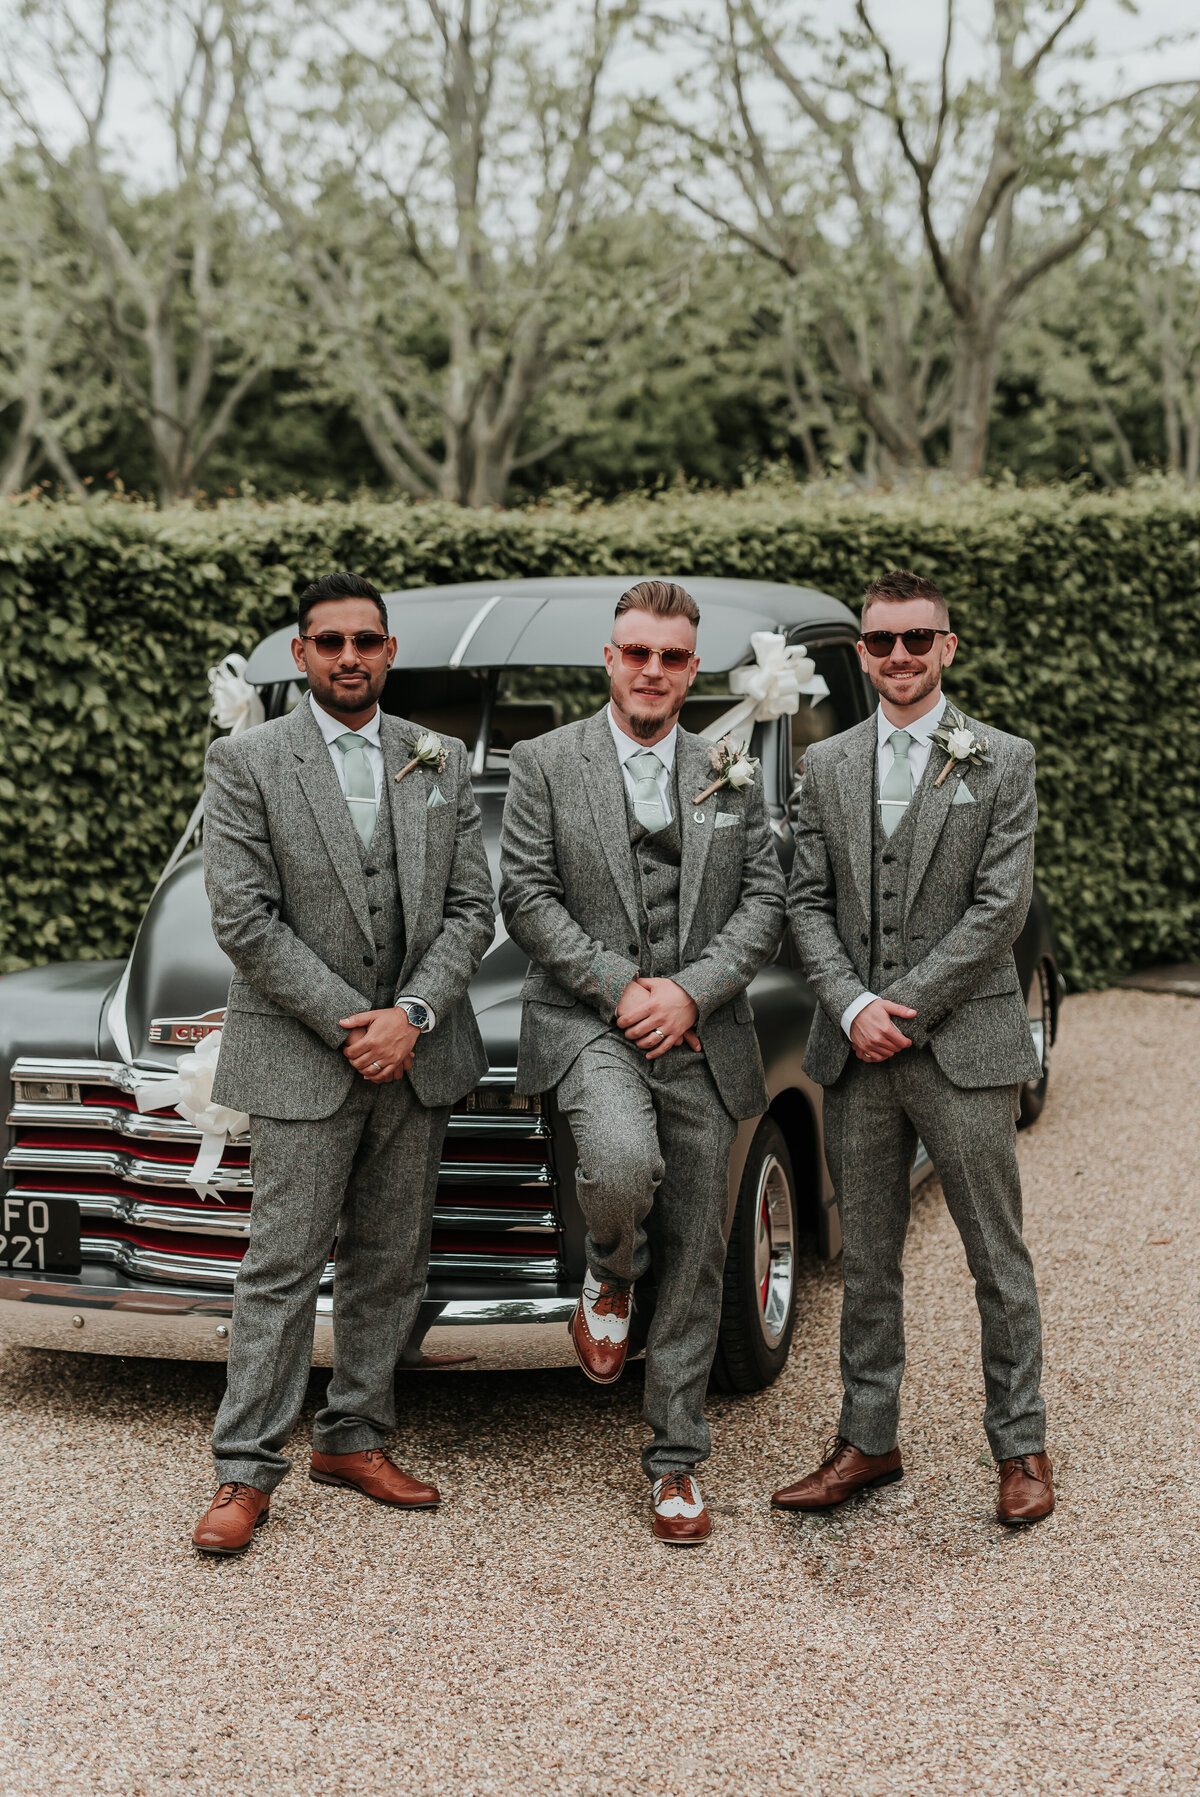 Grrom and his Groomsmen pose in front of his retro chevrolet pick up at a fun spring wedding at Bury Court Barn, Farnham